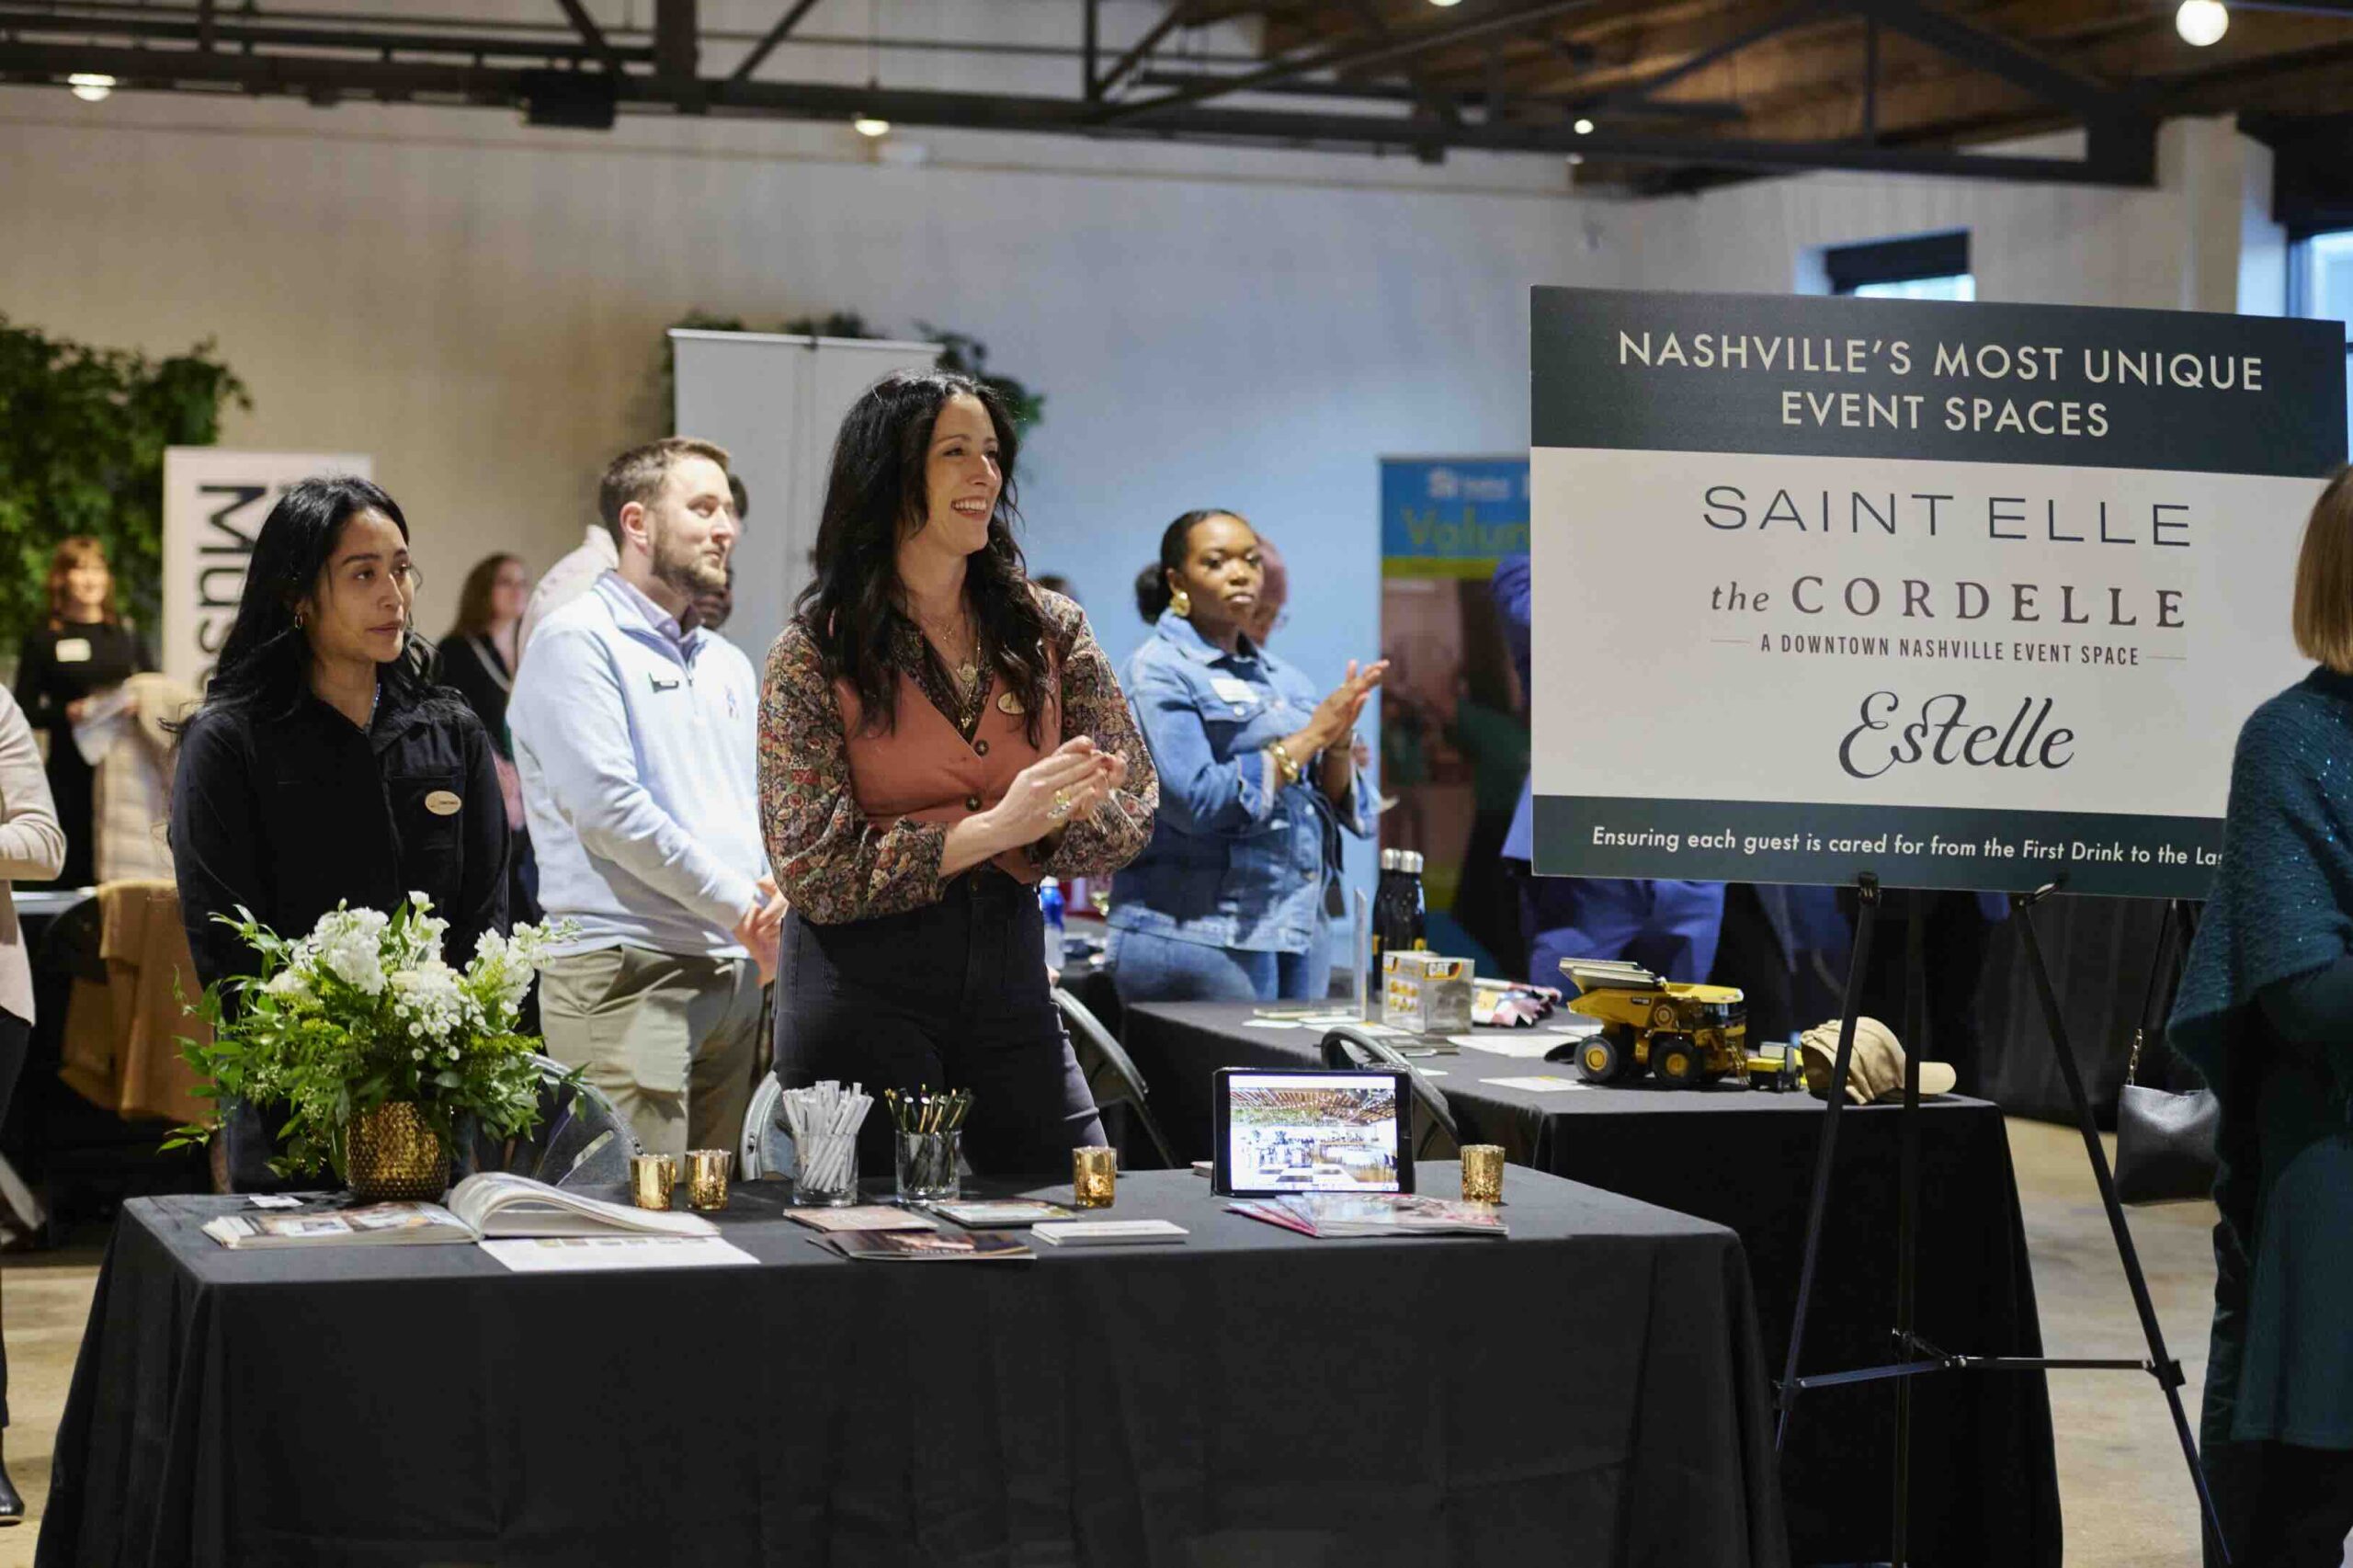 Group of people at an event showcasing "nashville's most unique event spaces," with a focus on saint elle & estelle. attendees are interacting and exploring the venue offerings, with promotional materials displayed on the tables.